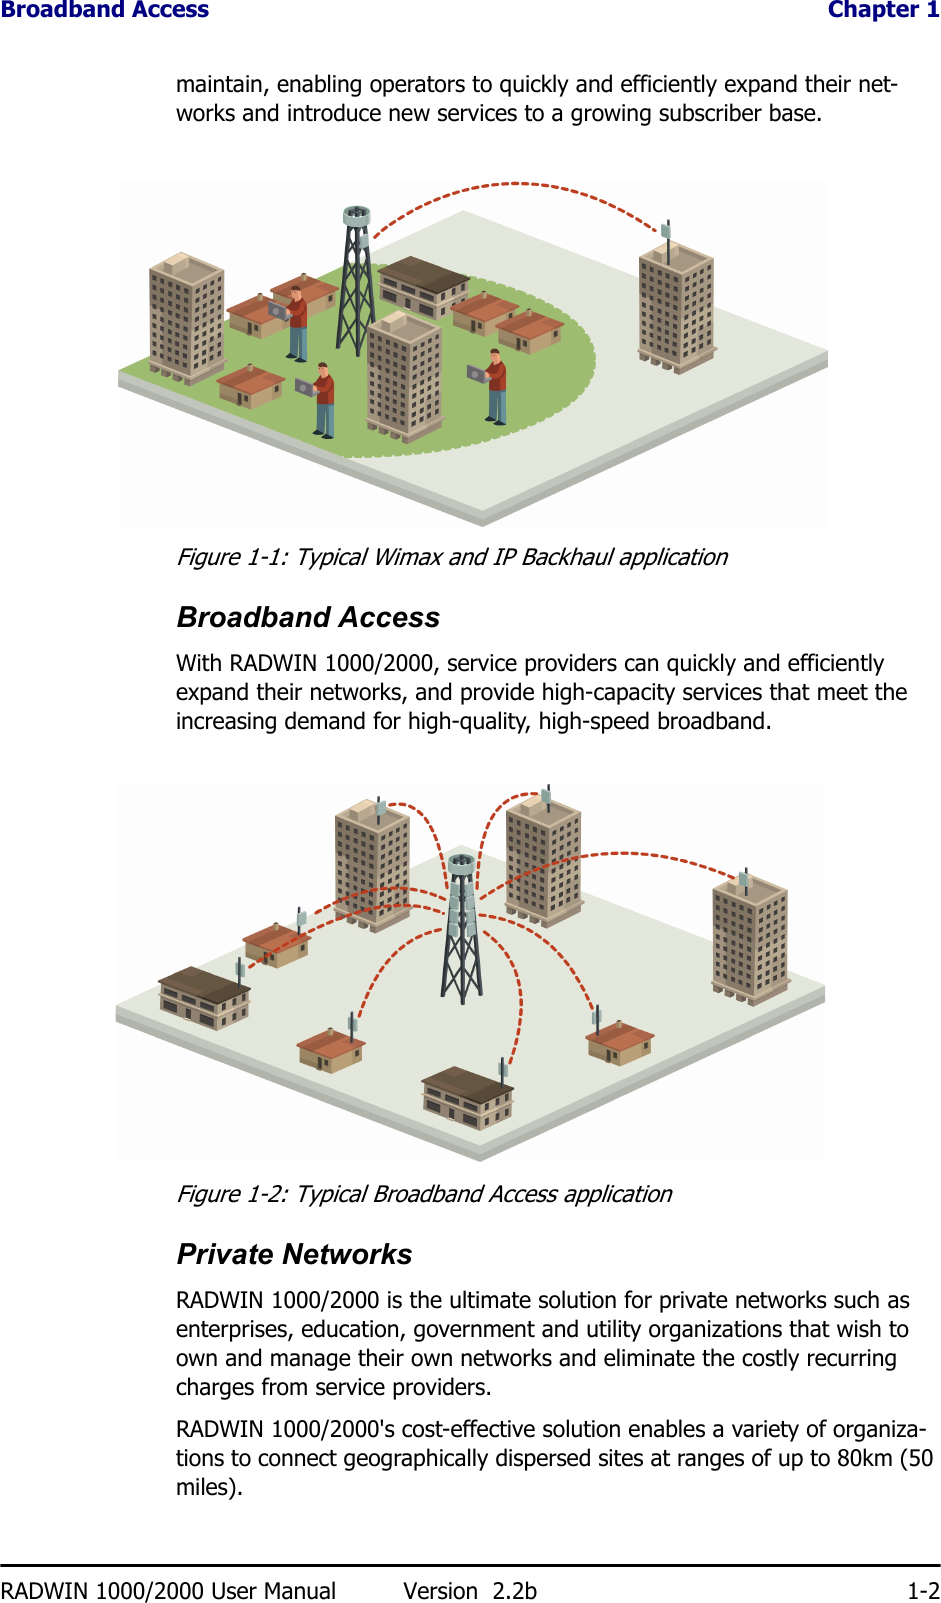 Broadband Access  Chapter 1RADWIN 1000/2000 User Manual Version  2.2b 1-2maintain, enabling operators to quickly and efficiently expand their net-works and introduce new services to a growing subscriber base.Figure 1-1: Typical Wimax and IP Backhaul applicationBroadband AccessWith RADWIN 1000/2000, service providers can quickly and efficiently expand their networks, and provide high-capacity services that meet the increasing demand for high-quality, high-speed broadband. Figure 1-2: Typical Broadband Access applicationPrivate NetworksRADWIN 1000/2000 is the ultimate solution for private networks such as enterprises, education, government and utility organizations that wish to own and manage their own networks and eliminate the costly recurring charges from service providers.RADWIN 1000/2000&apos;s cost-effective solution enables a variety of organiza-tions to connect geographically dispersed sites at ranges of up to 80km (50 miles).